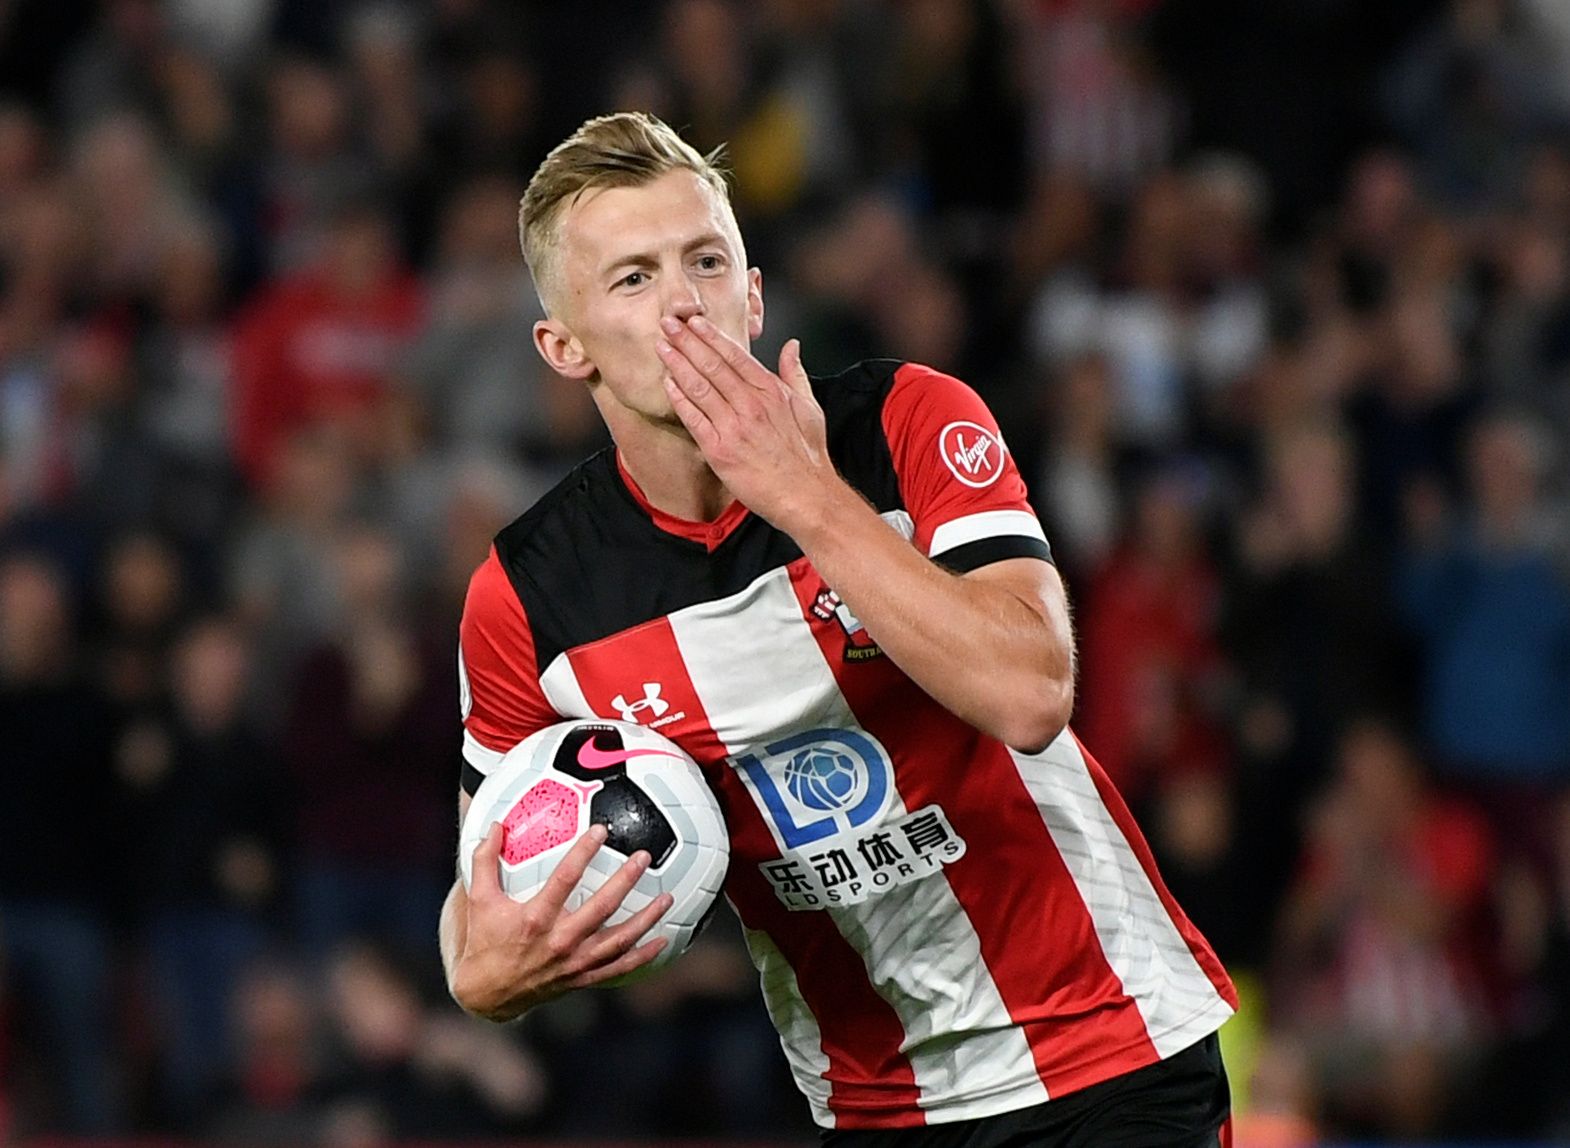 Soccer Football - Premier League - Southampton v AFC Bournemouth - St Mary's Stadium, Southampton, Britain - September 20, 2019   Southampton's James Ward-Prowse celebrates scoring their first goal from the penalty spot        Action Images via Reuters/Tony O'Brien    EDITORIAL USE ONLY. No use with unauthorized audio, video, data, fixture lists, club/league logos or "live" services. Online in-match use limited to 75 images, no video emulation. No use in betting, games or single club/league/play